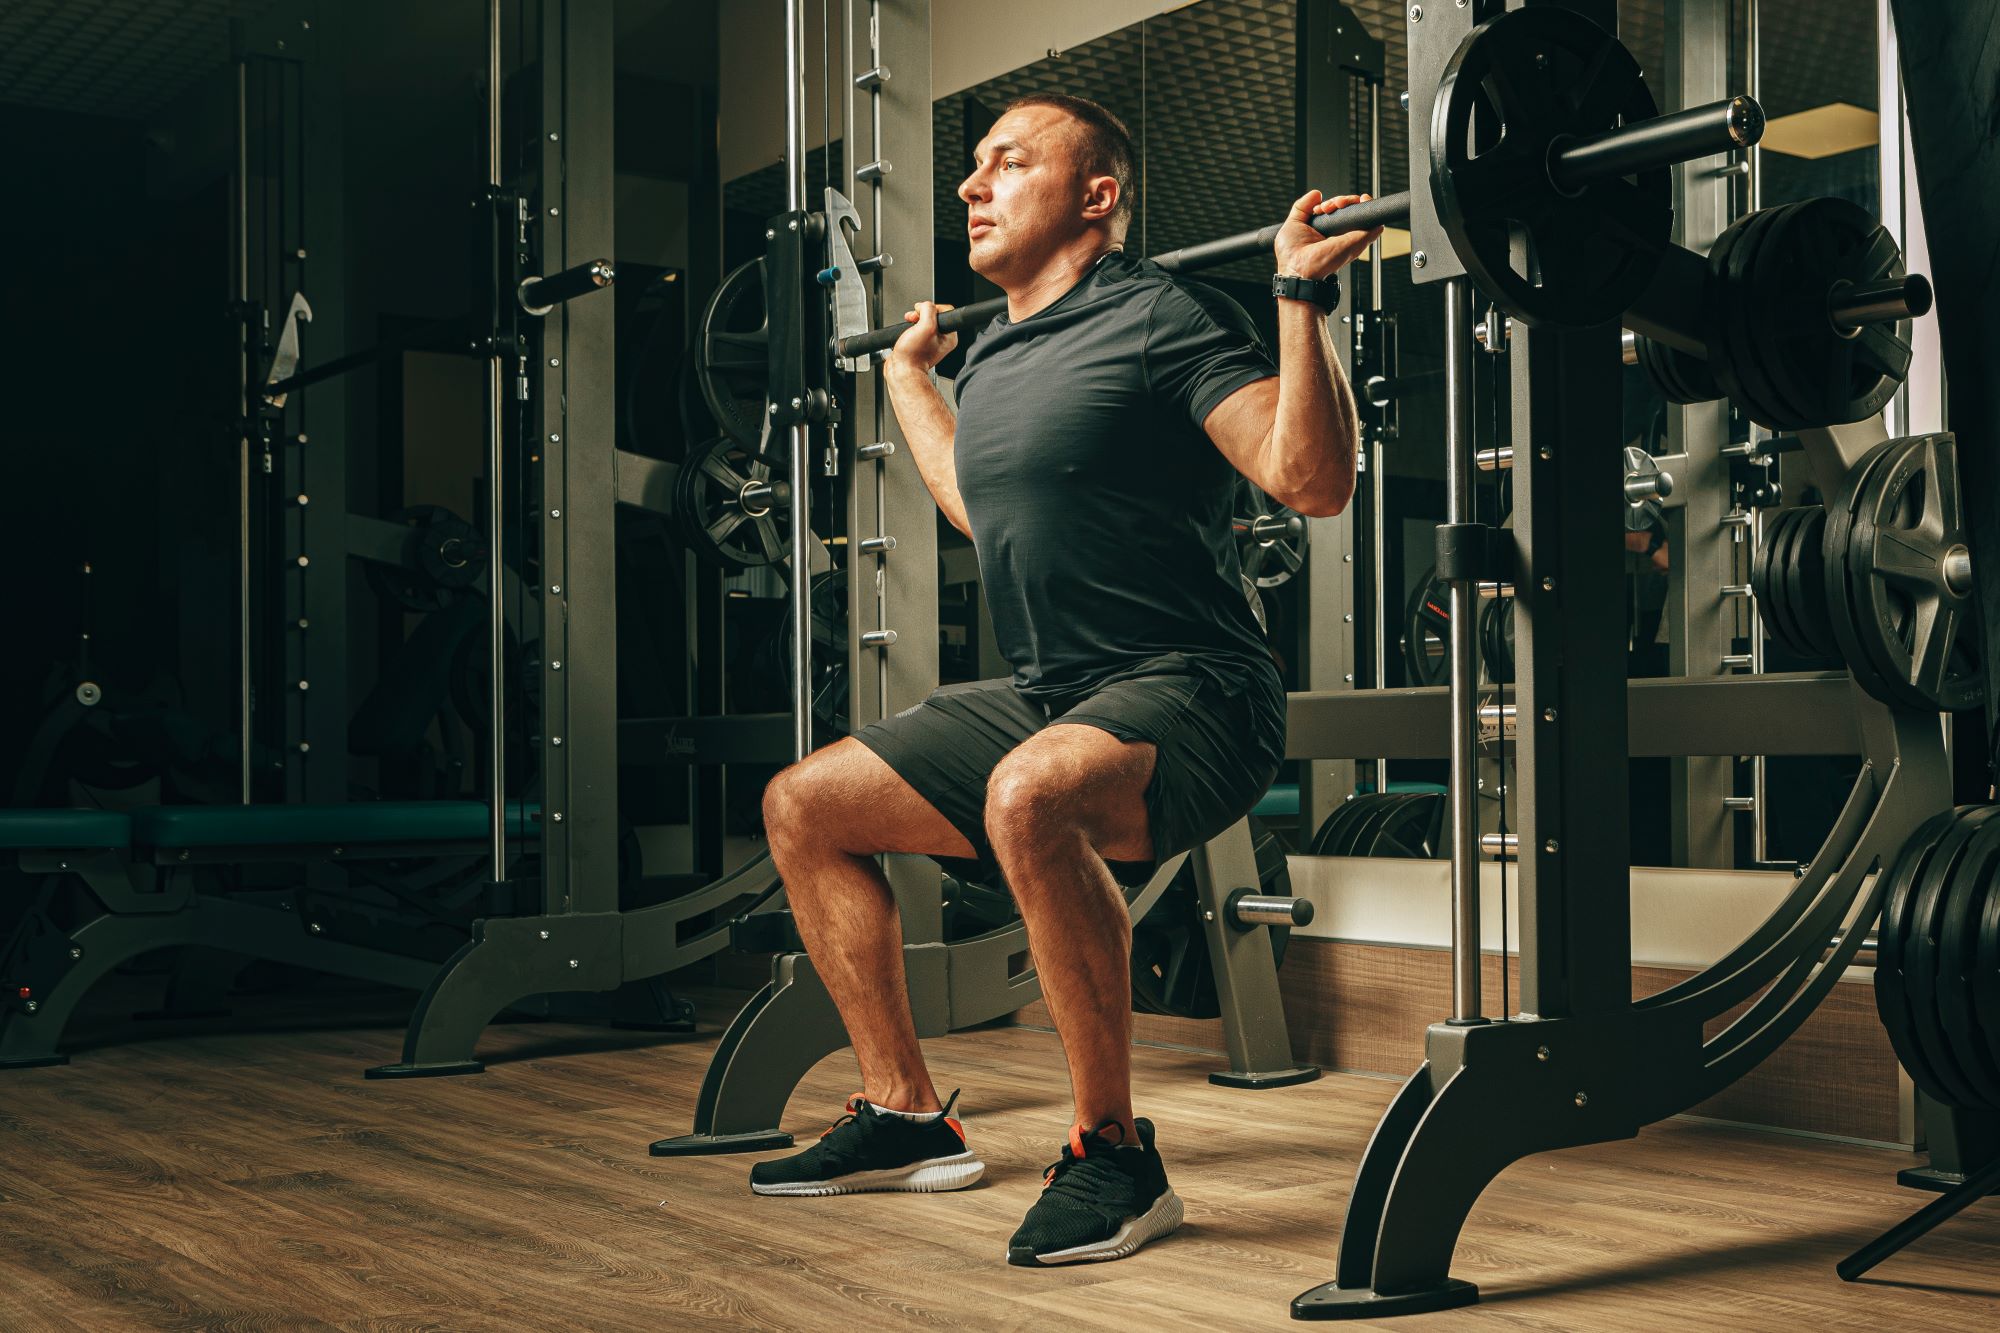 7 Easy Ways to Improve Your Squat | Life by Daily Burn